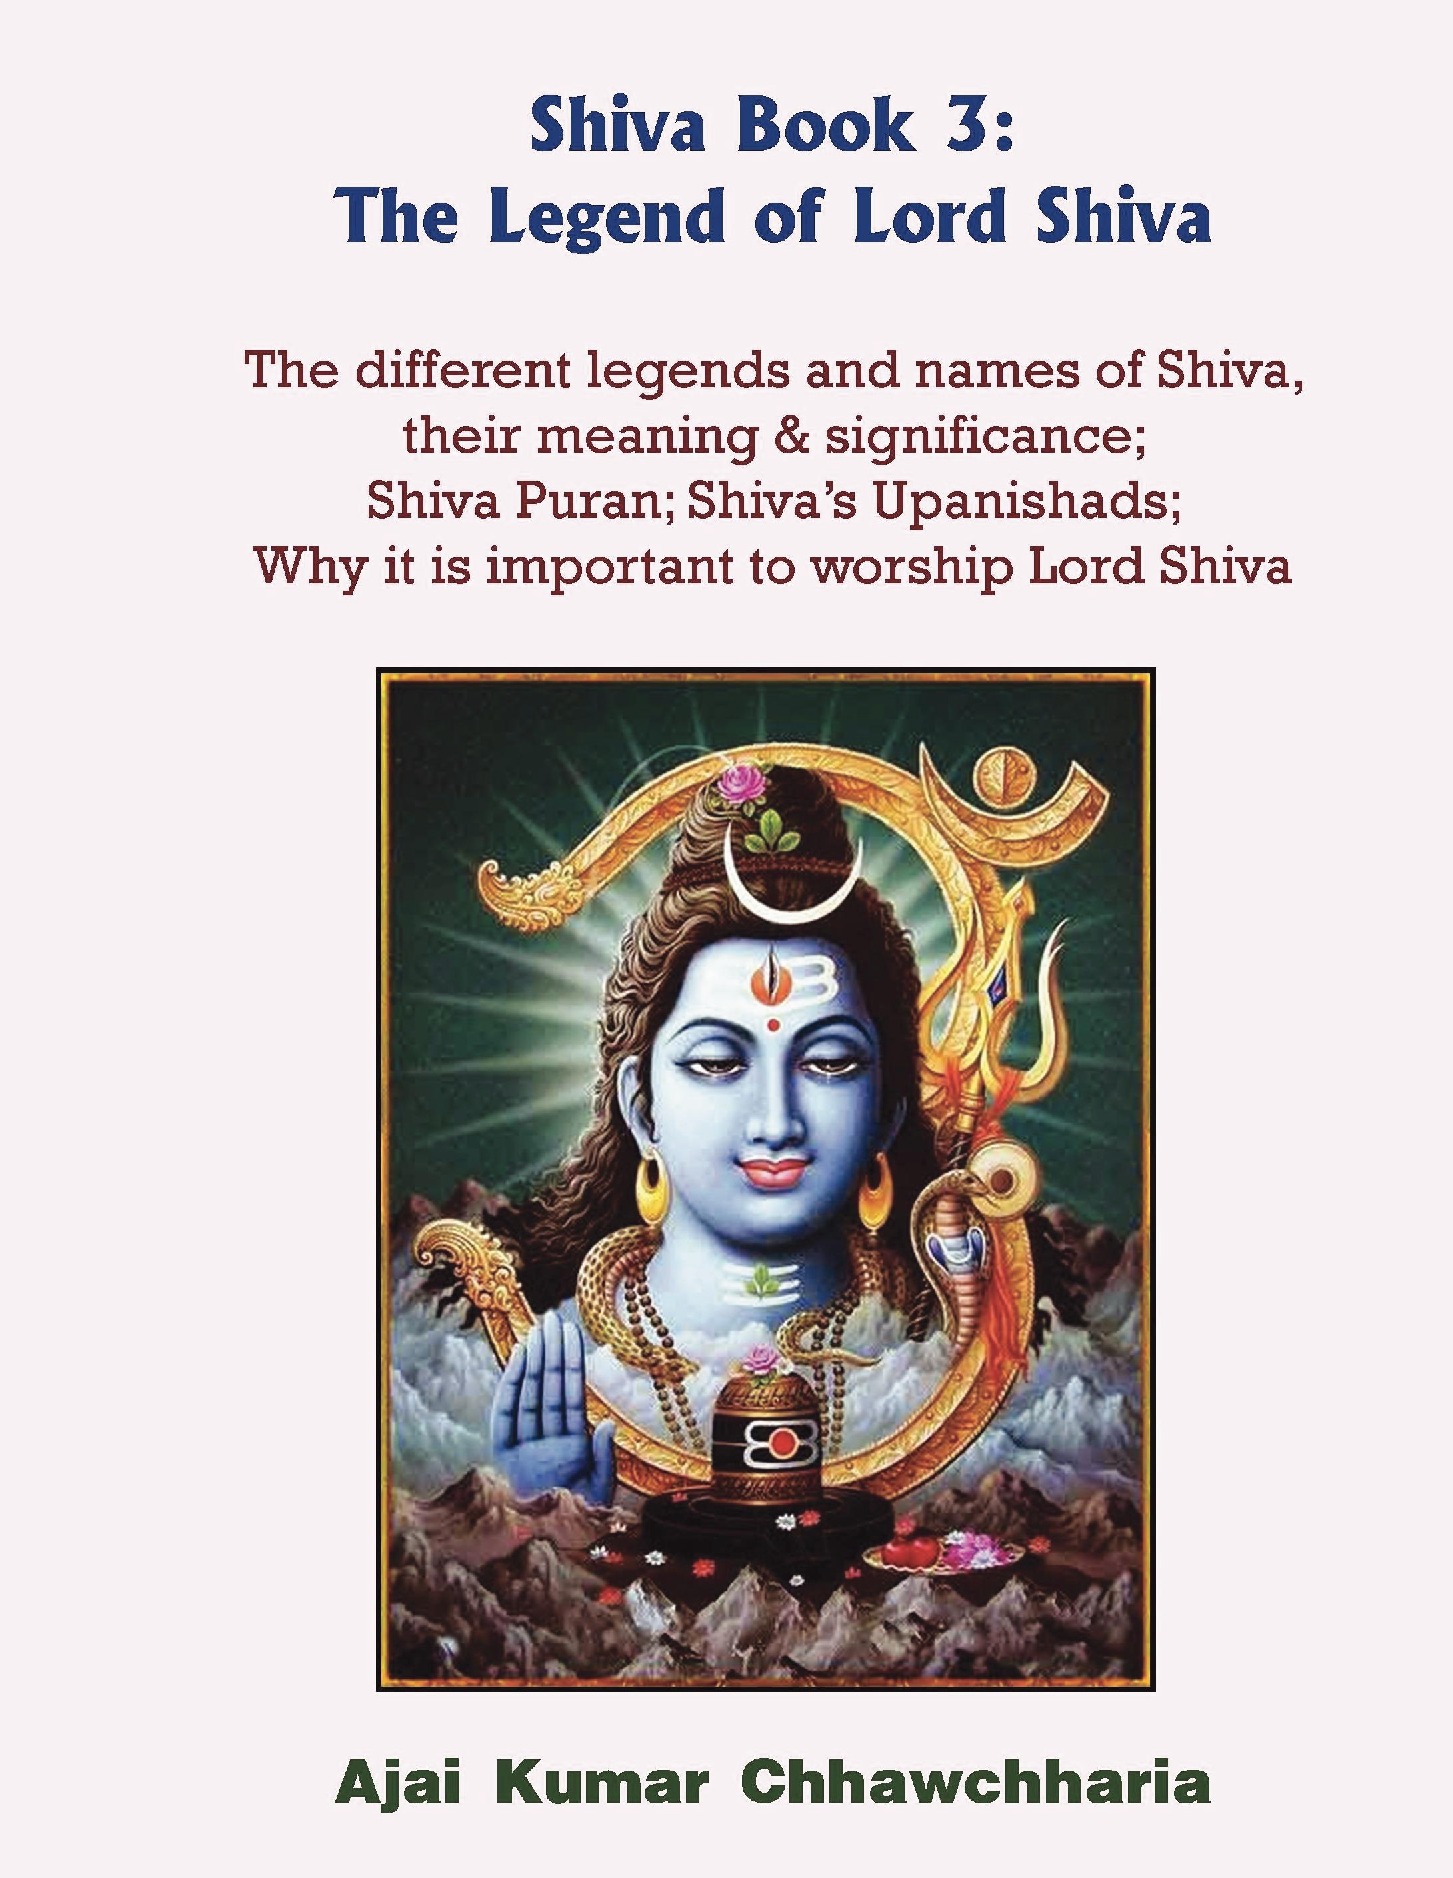 108 names of lord shiva in hindi mp3 download free